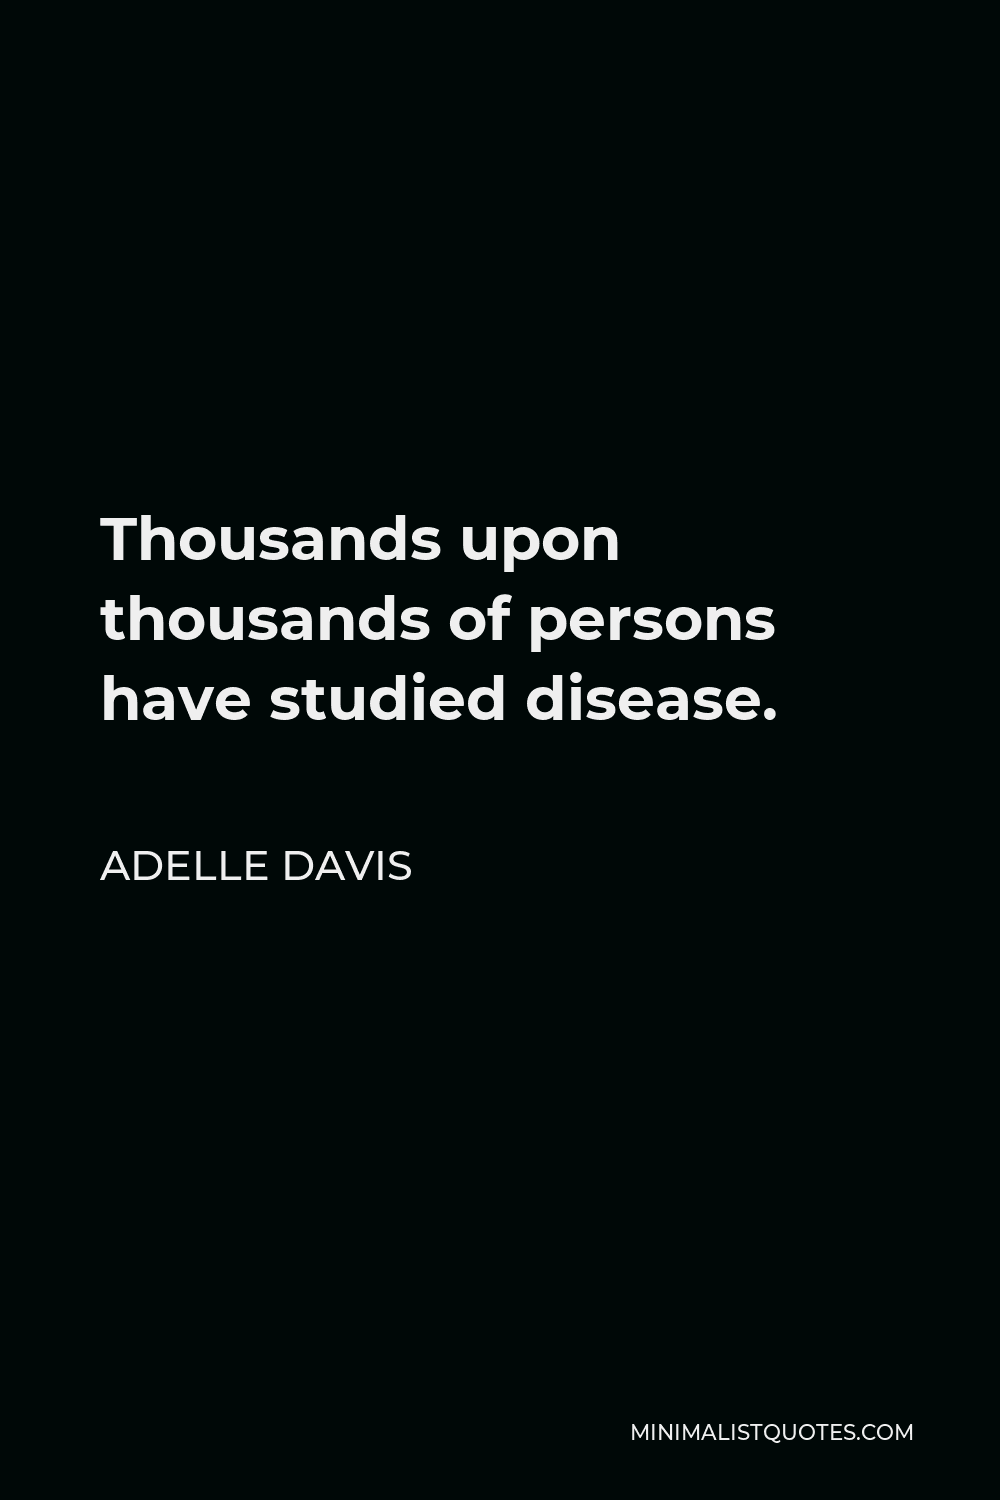 Adelle Davis Quote - Thousands upon thousands of persons have studied disease.